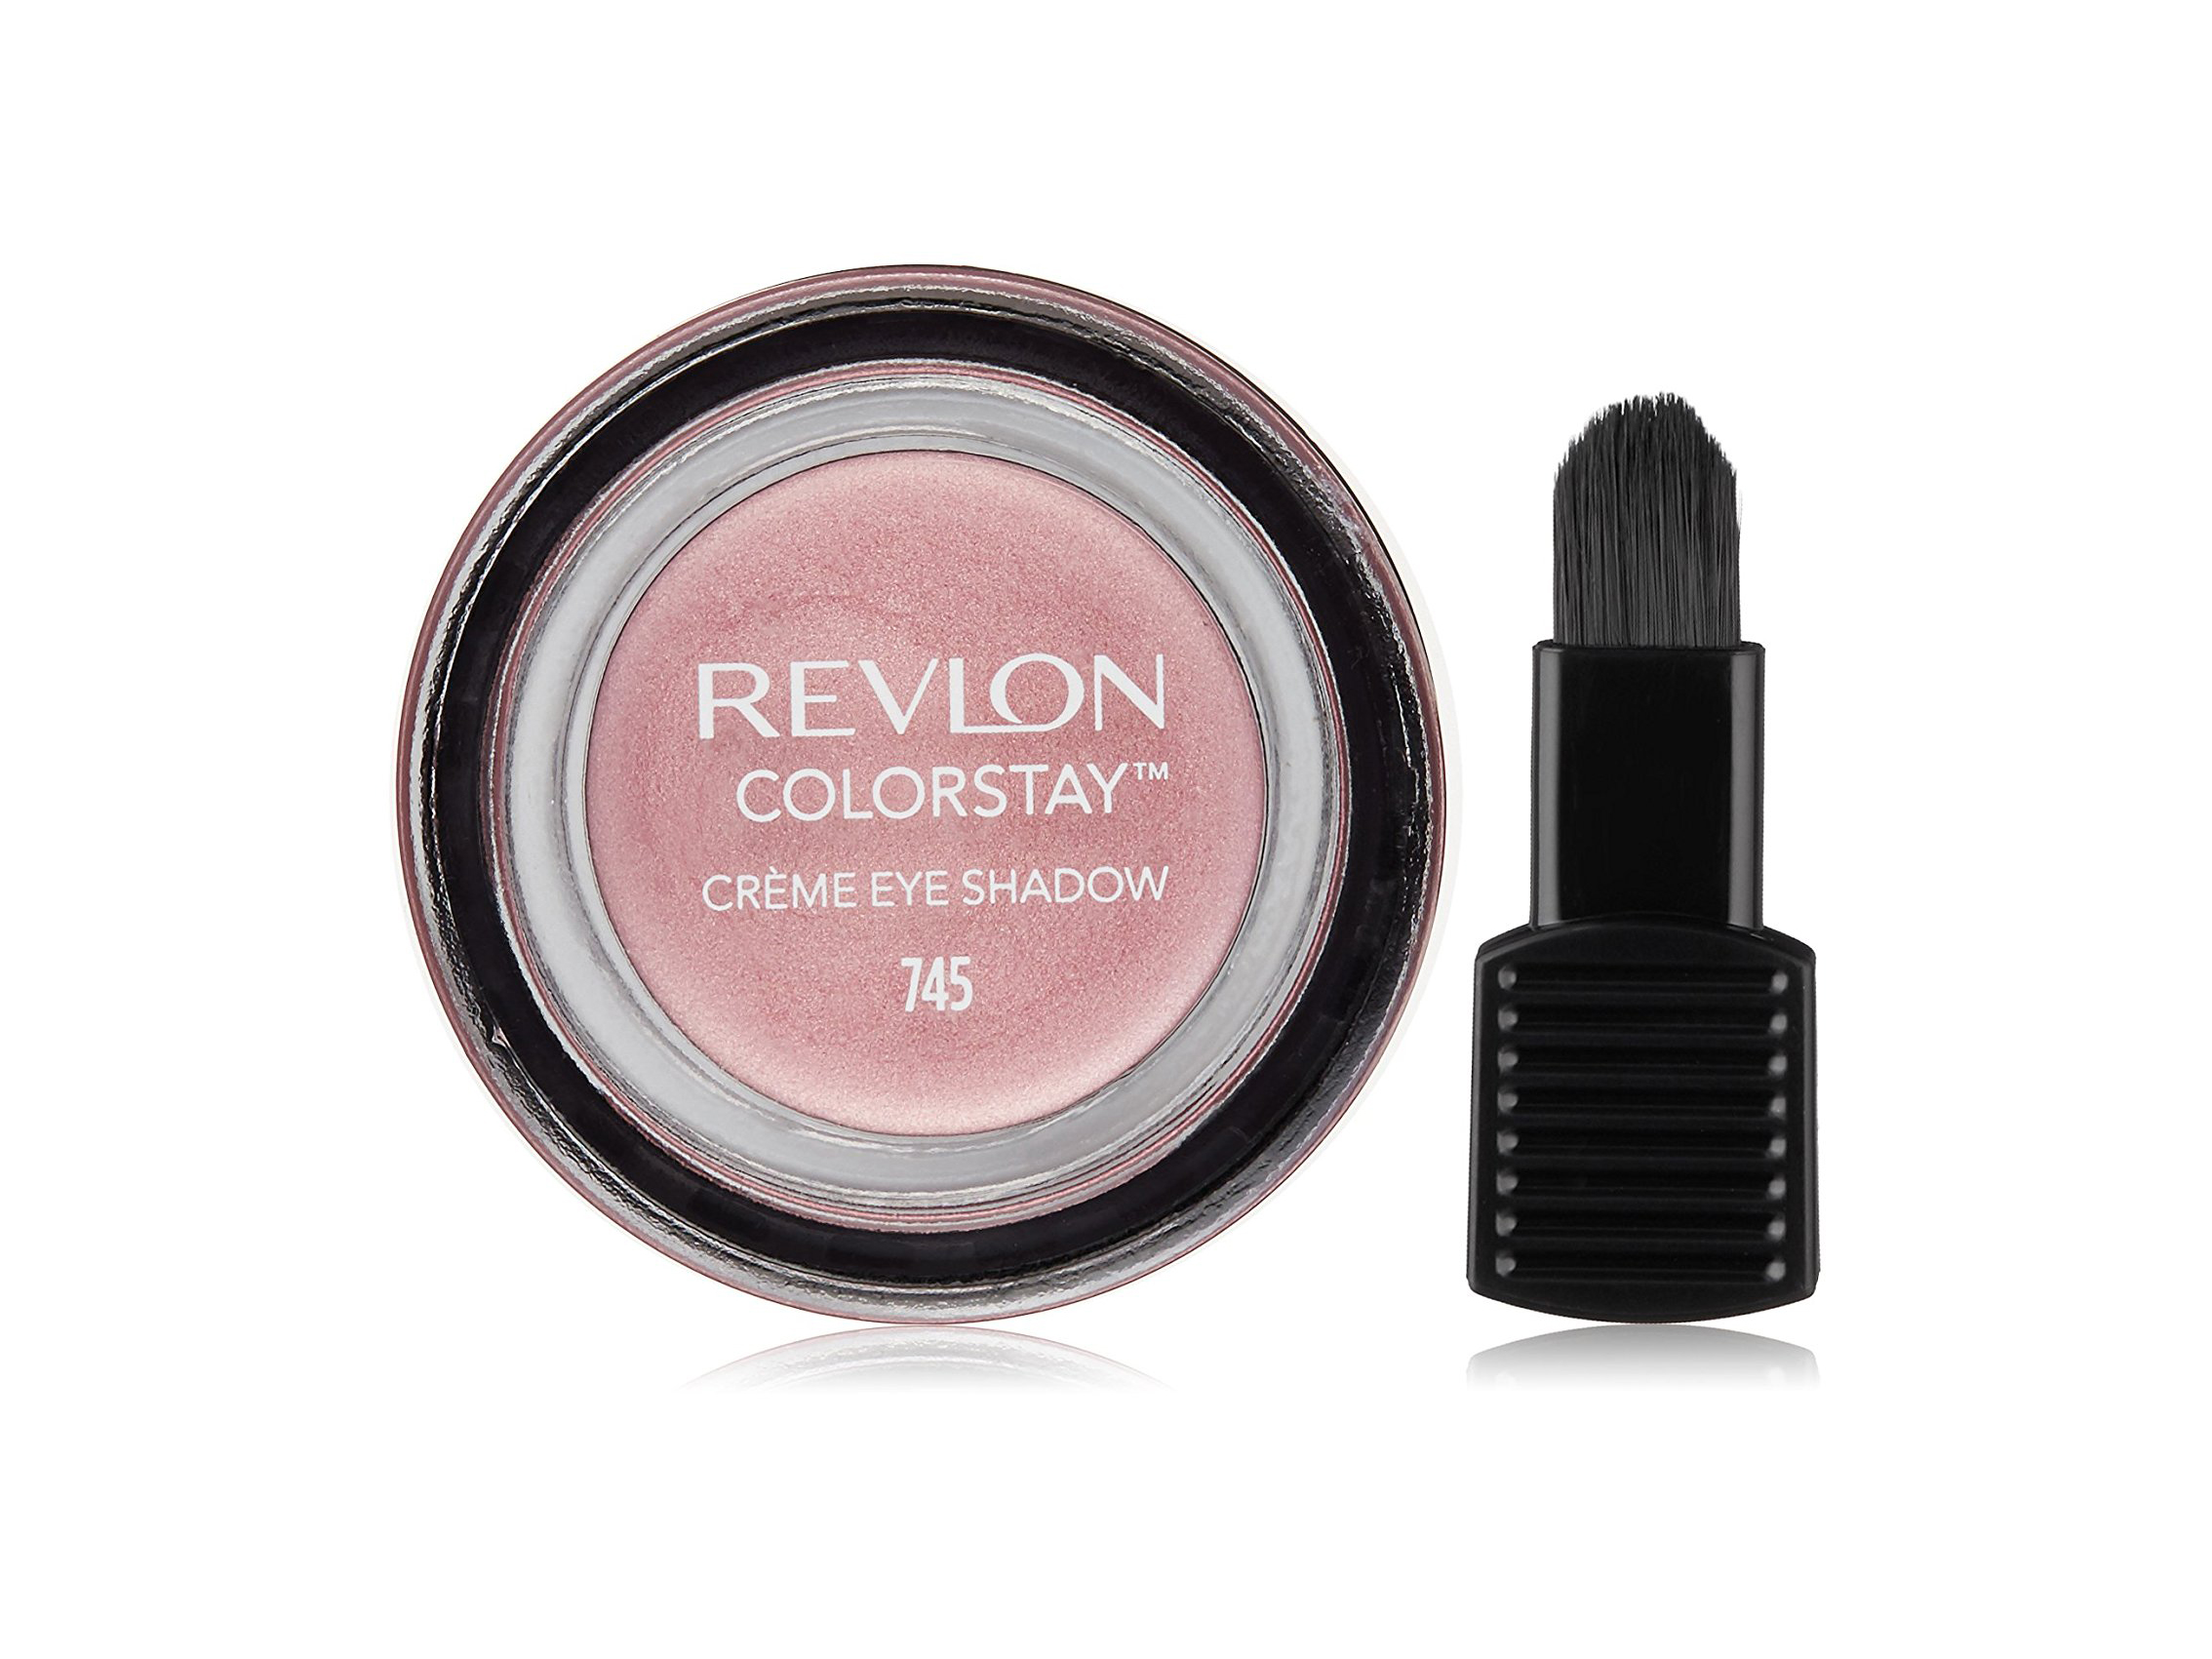 Image of Revlon Colorstay Creme Eye Shadow Ombretto Colore 745 Cherry Blossom